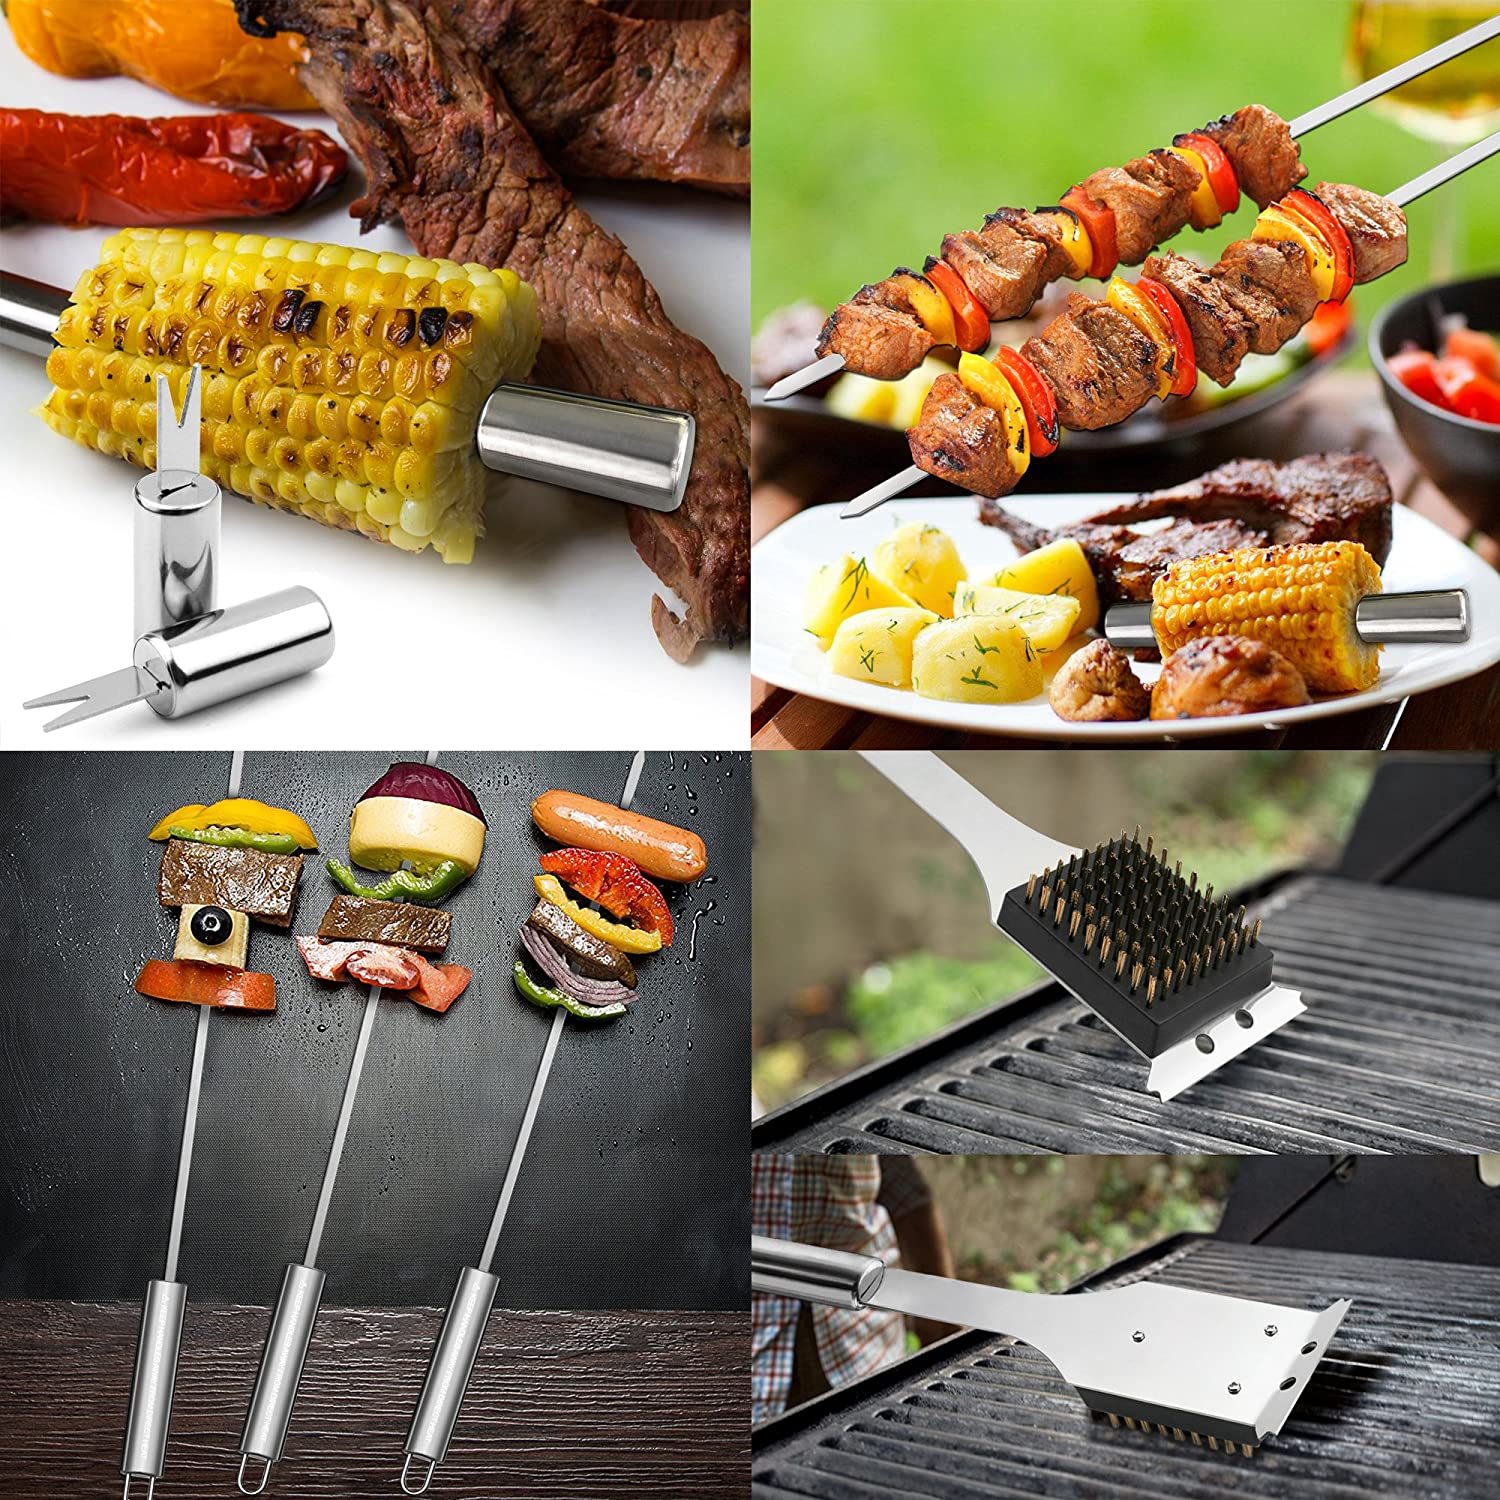 GRILLART Grill Tools Grill Utensils Set - 3PCS BBQ Tools, Stainless  Barbeque Grill Accessories - Spatula/Tongs/Fork, with Insulated Glove,  Ideal BBQ